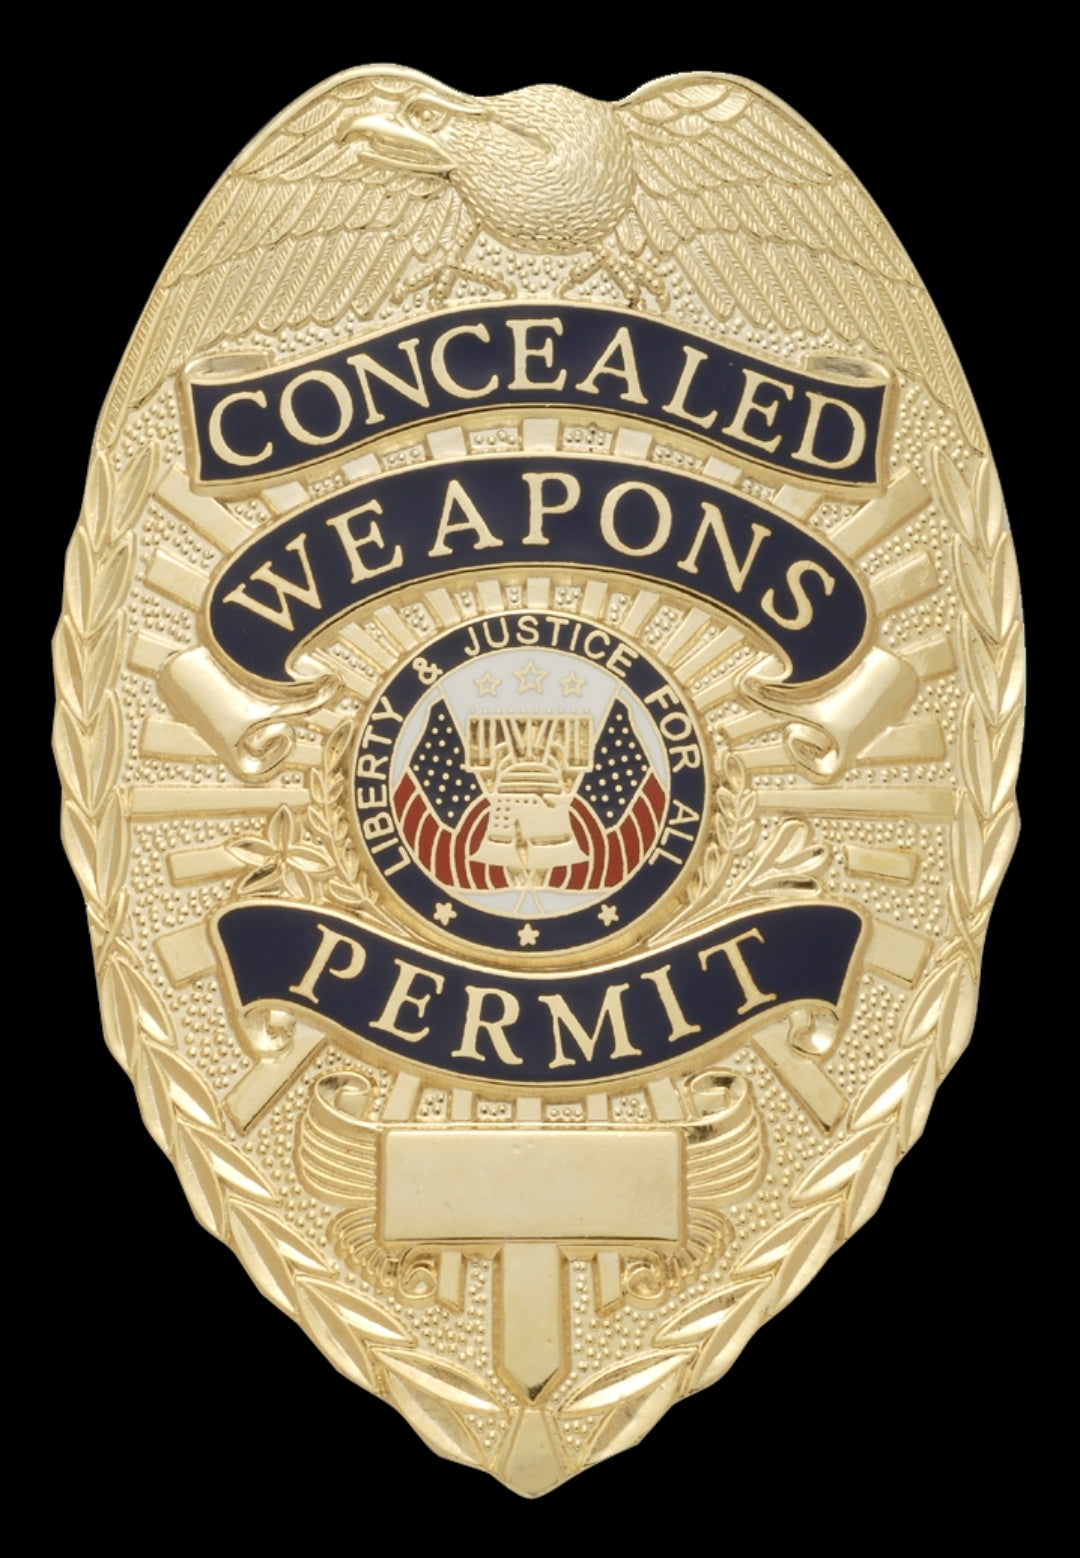 B8730-G Concealed Weapons Permit